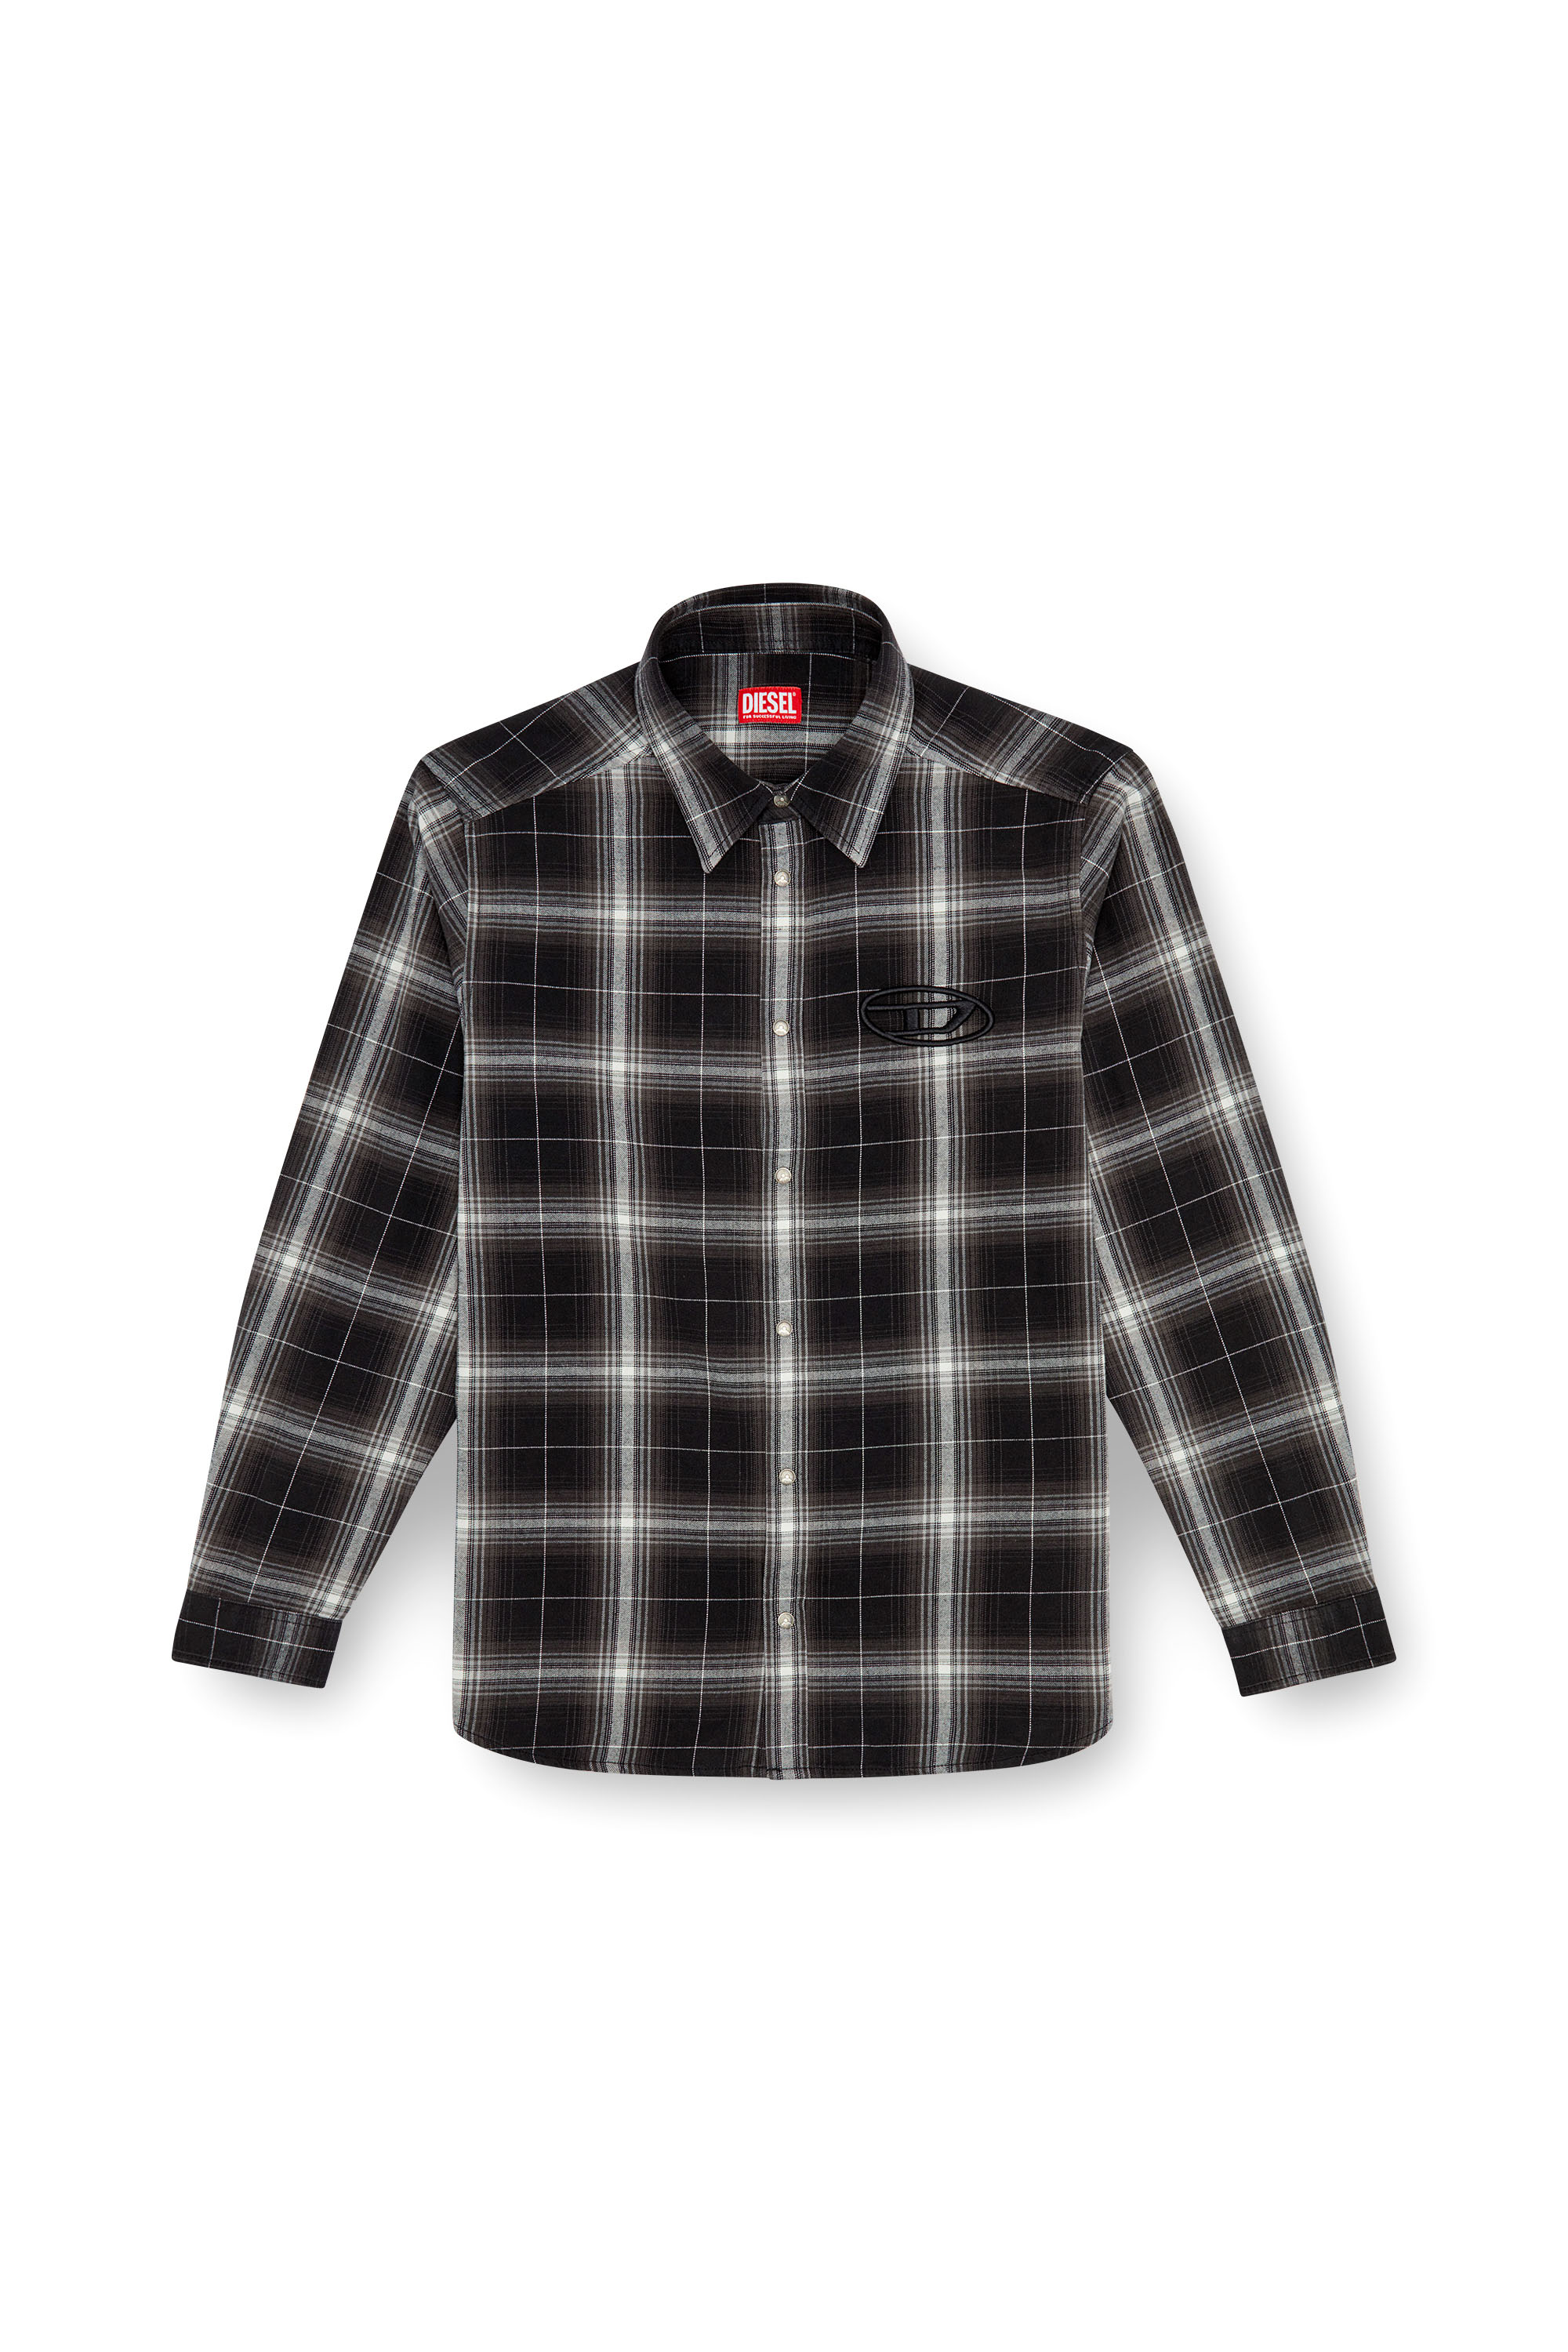 Diesel - S-SIMPLY-A, Man Check flannel shirt in Black - Image 3